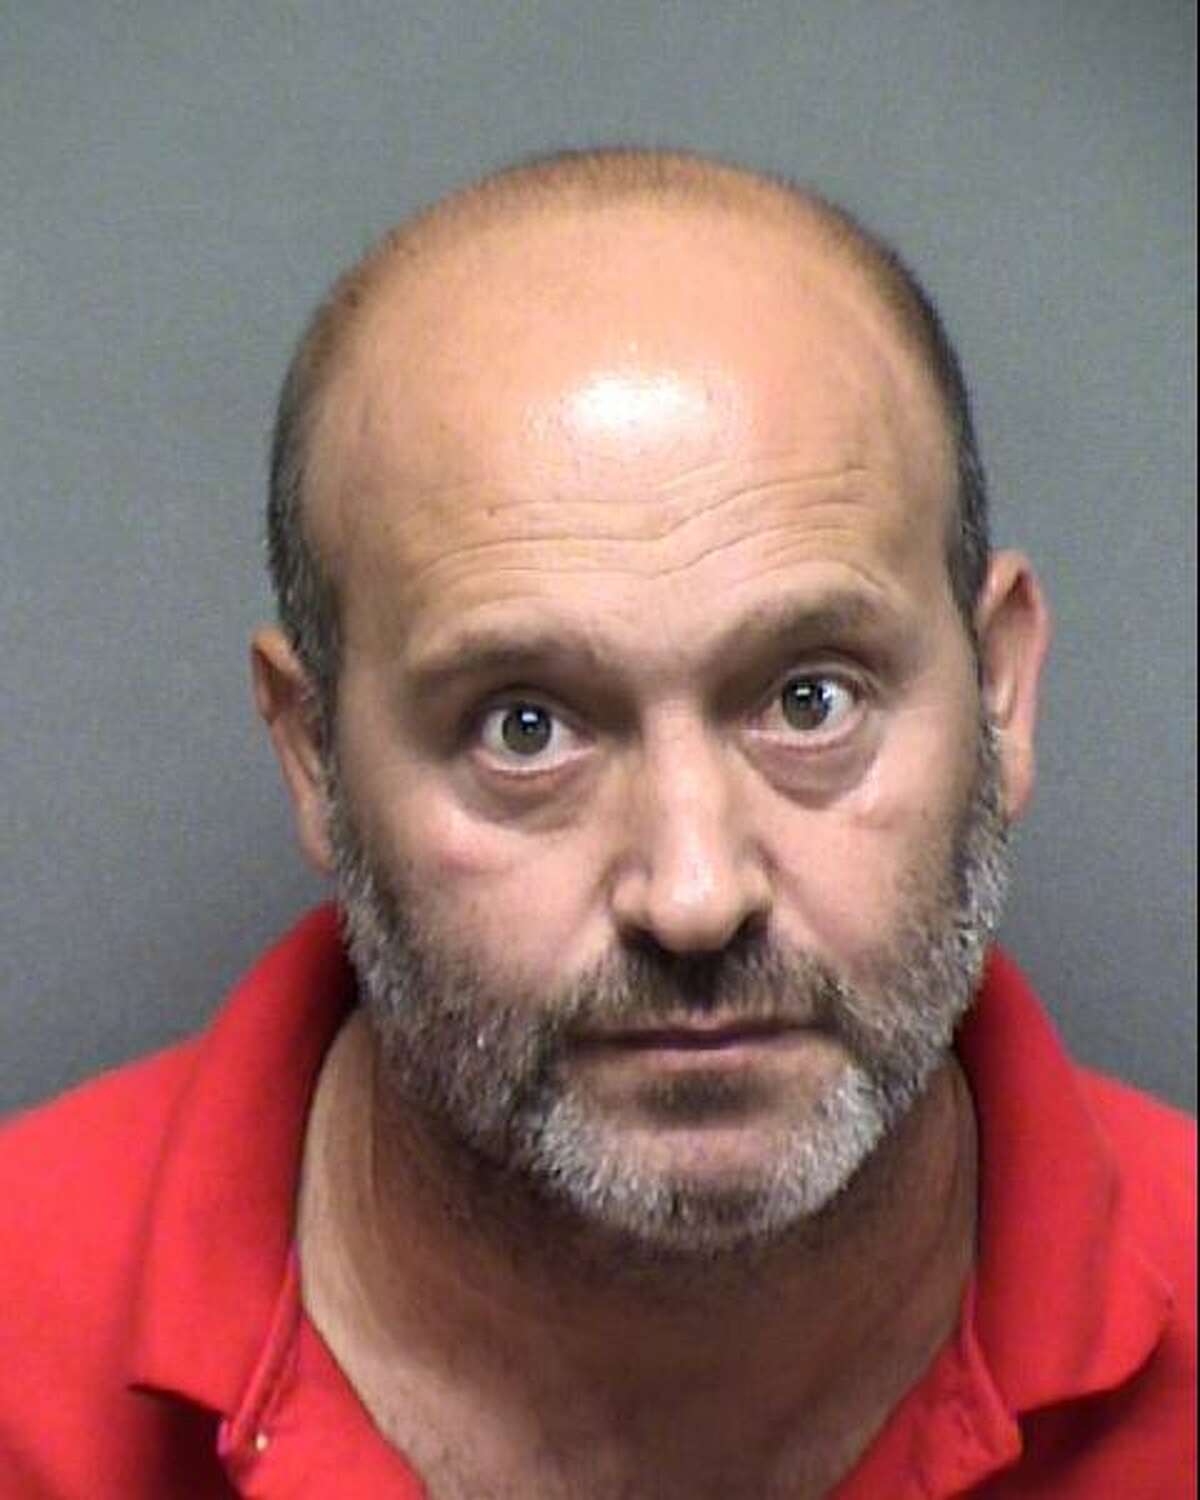 Abdalkarim Abdalaziz, 44, is charged with terroristic threat. His bail is set at $25,000.